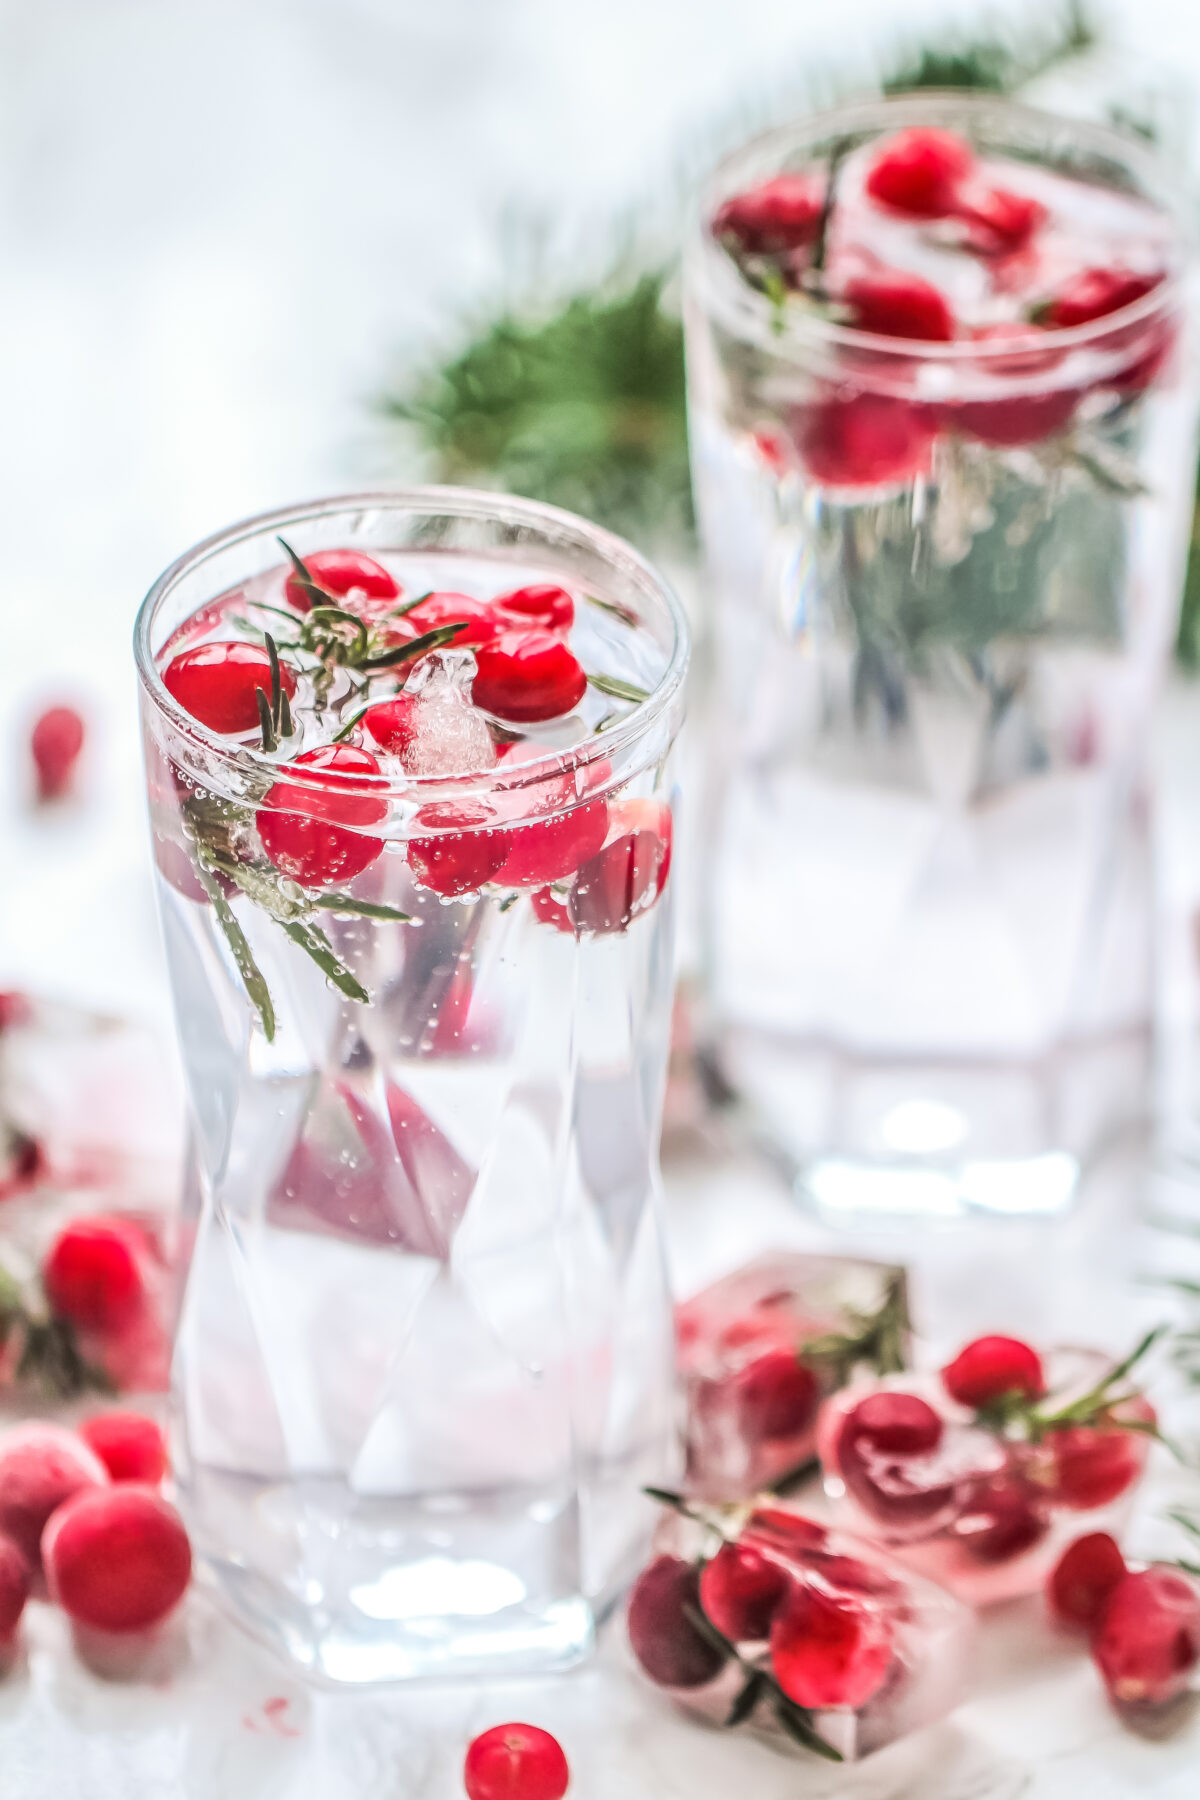 These cranberry ice cubes are so easy to make, they're perfect for holiday parties. They add a festive touch of colour to your next event!